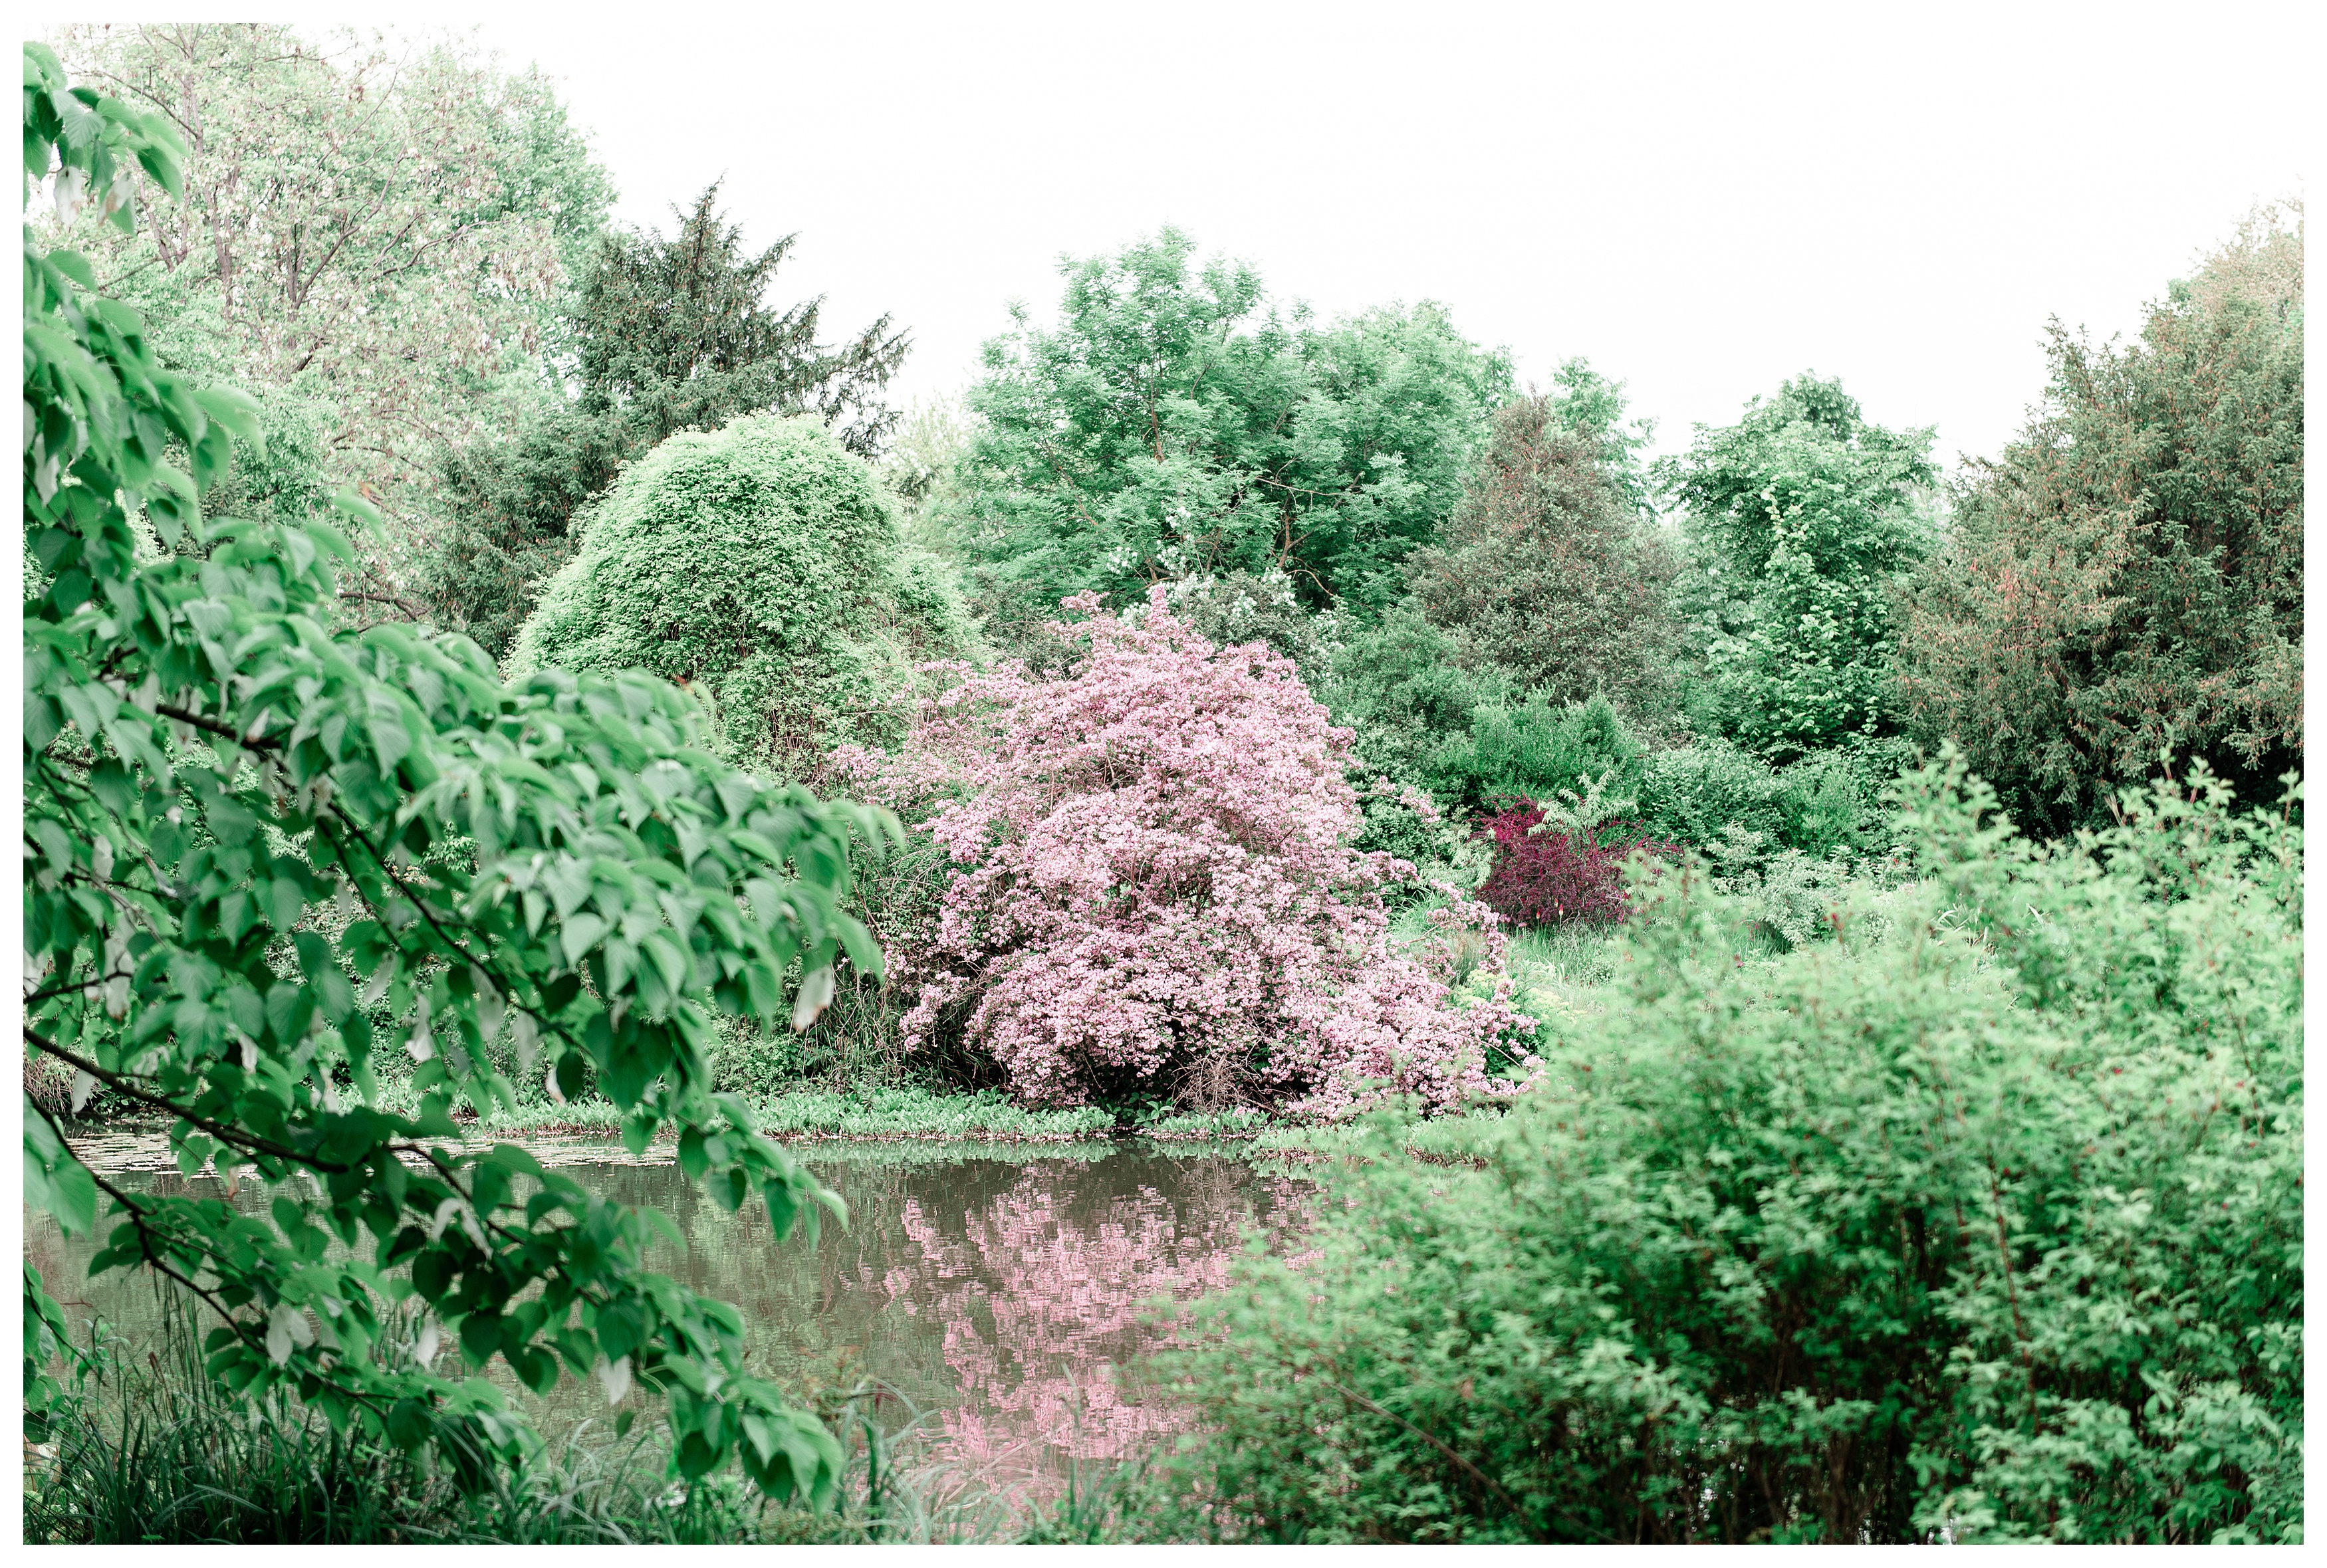 lake with pink flowers blooming on a tree in the parc de bagatelle in paris